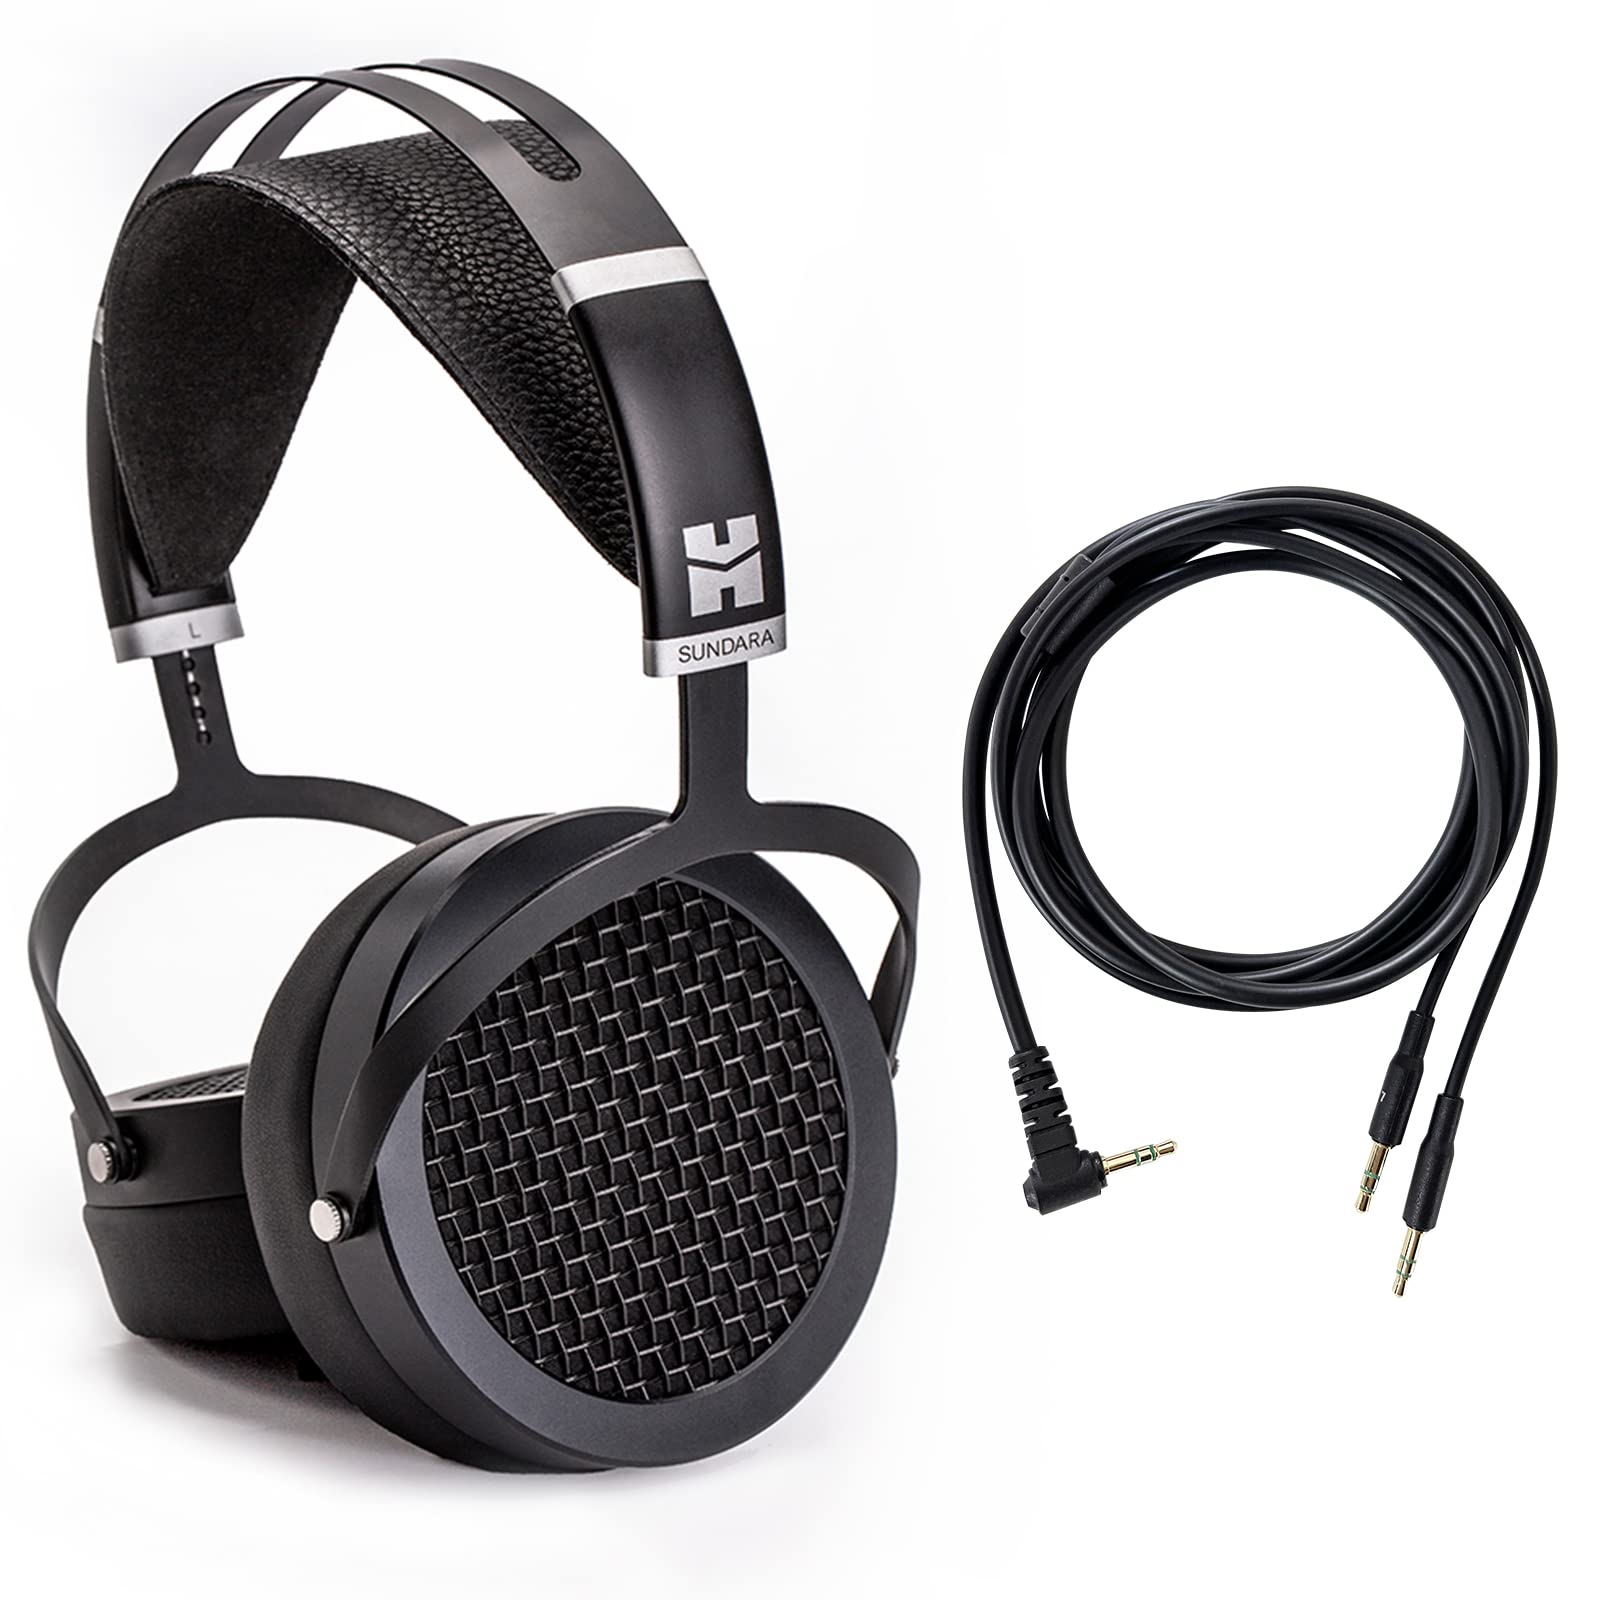 Hi-Fi Headphone with 3.5mm Connectors, Planar Magnetic, Comfortable Fit with Updated Earpads-Black